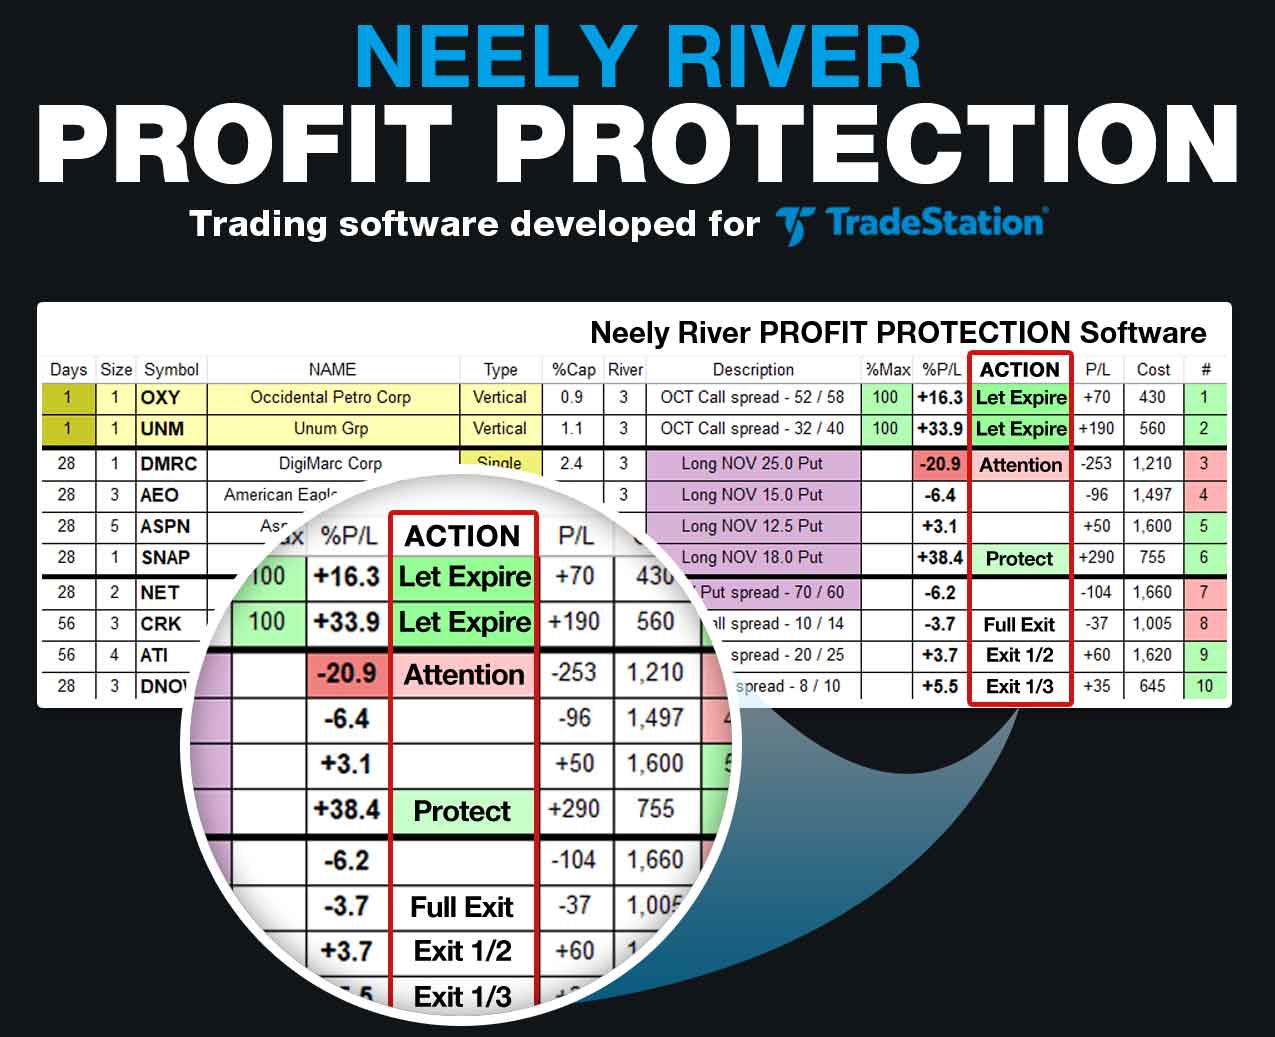 Neely River Profit Protection Software